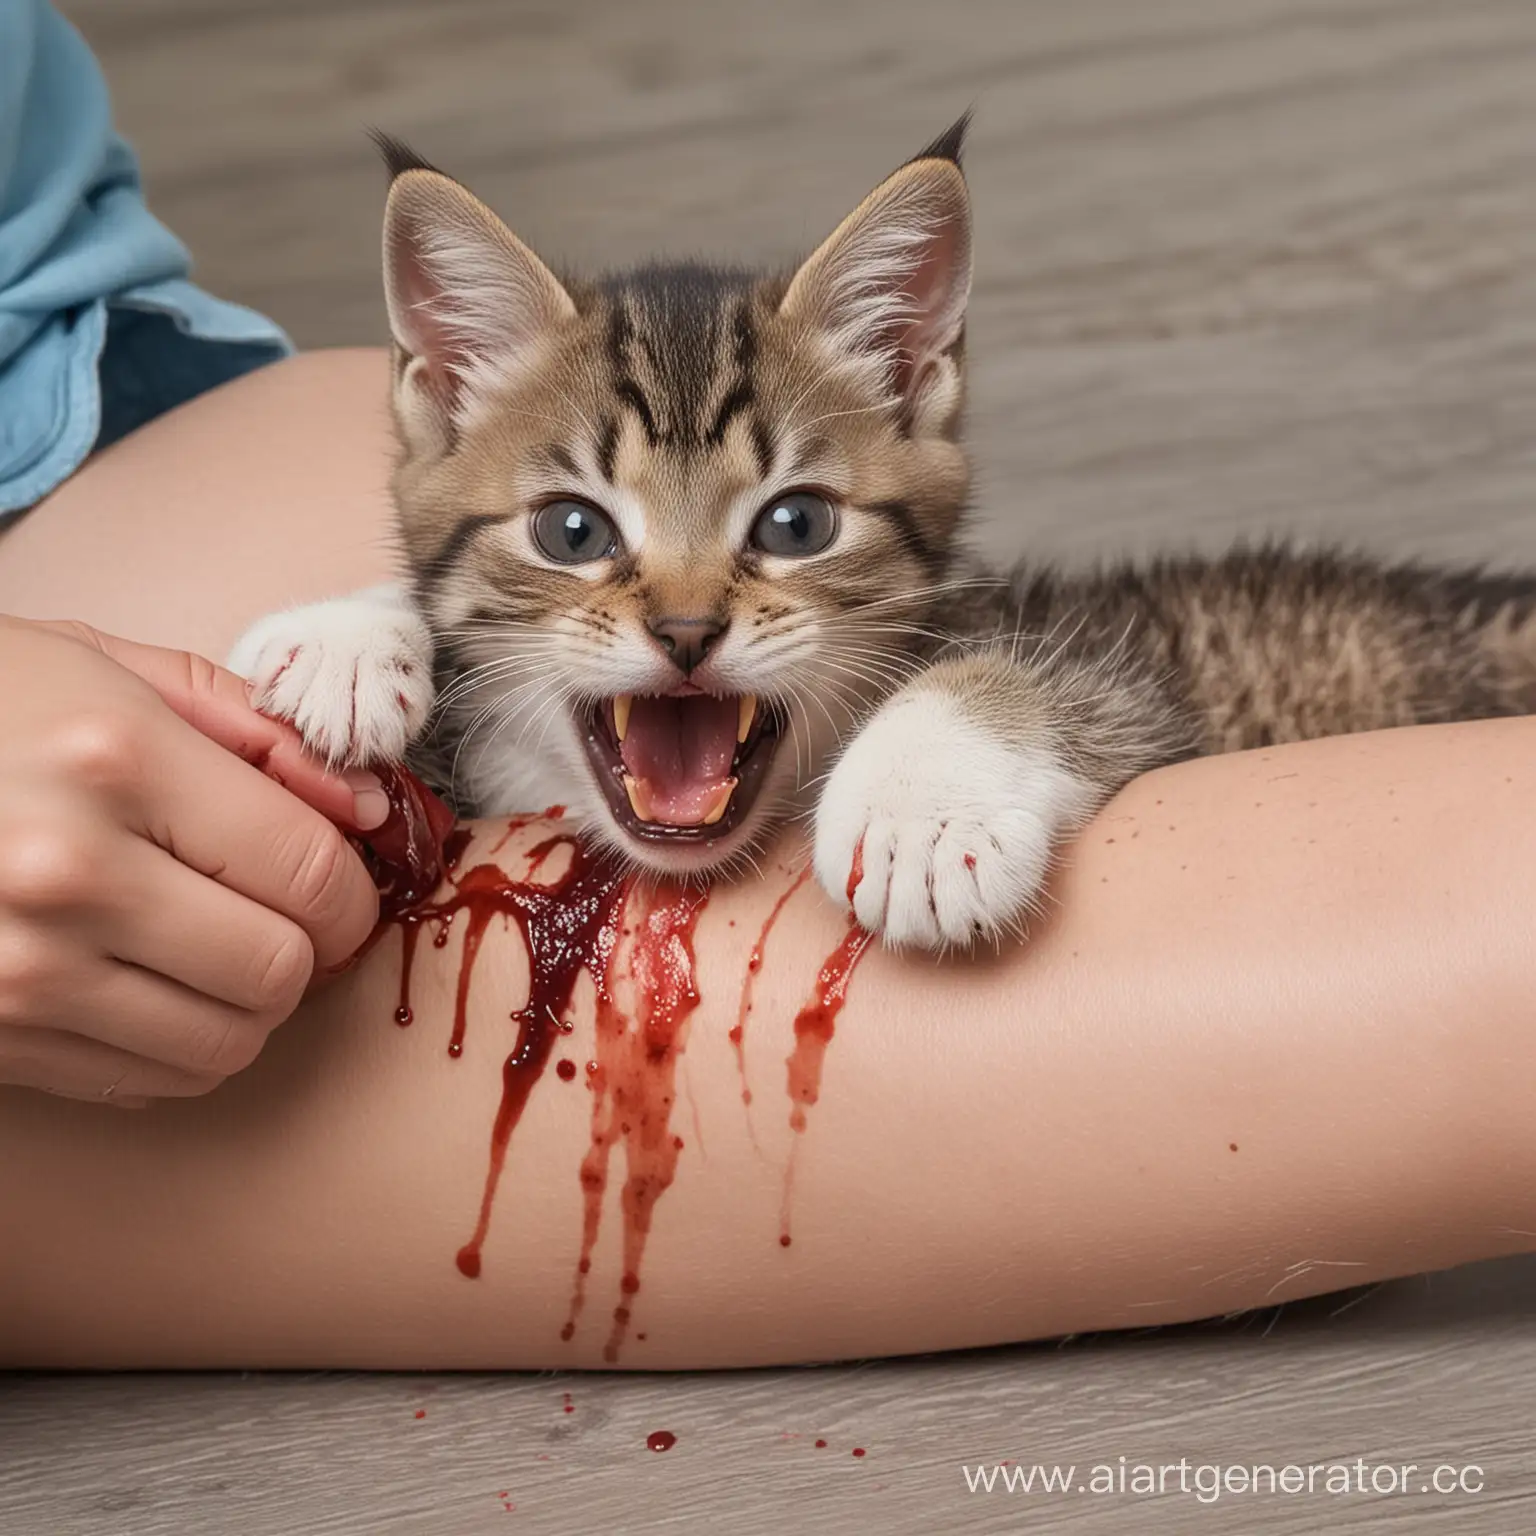 Playful-Kitten-Biting-Owners-Leg-with-Blood